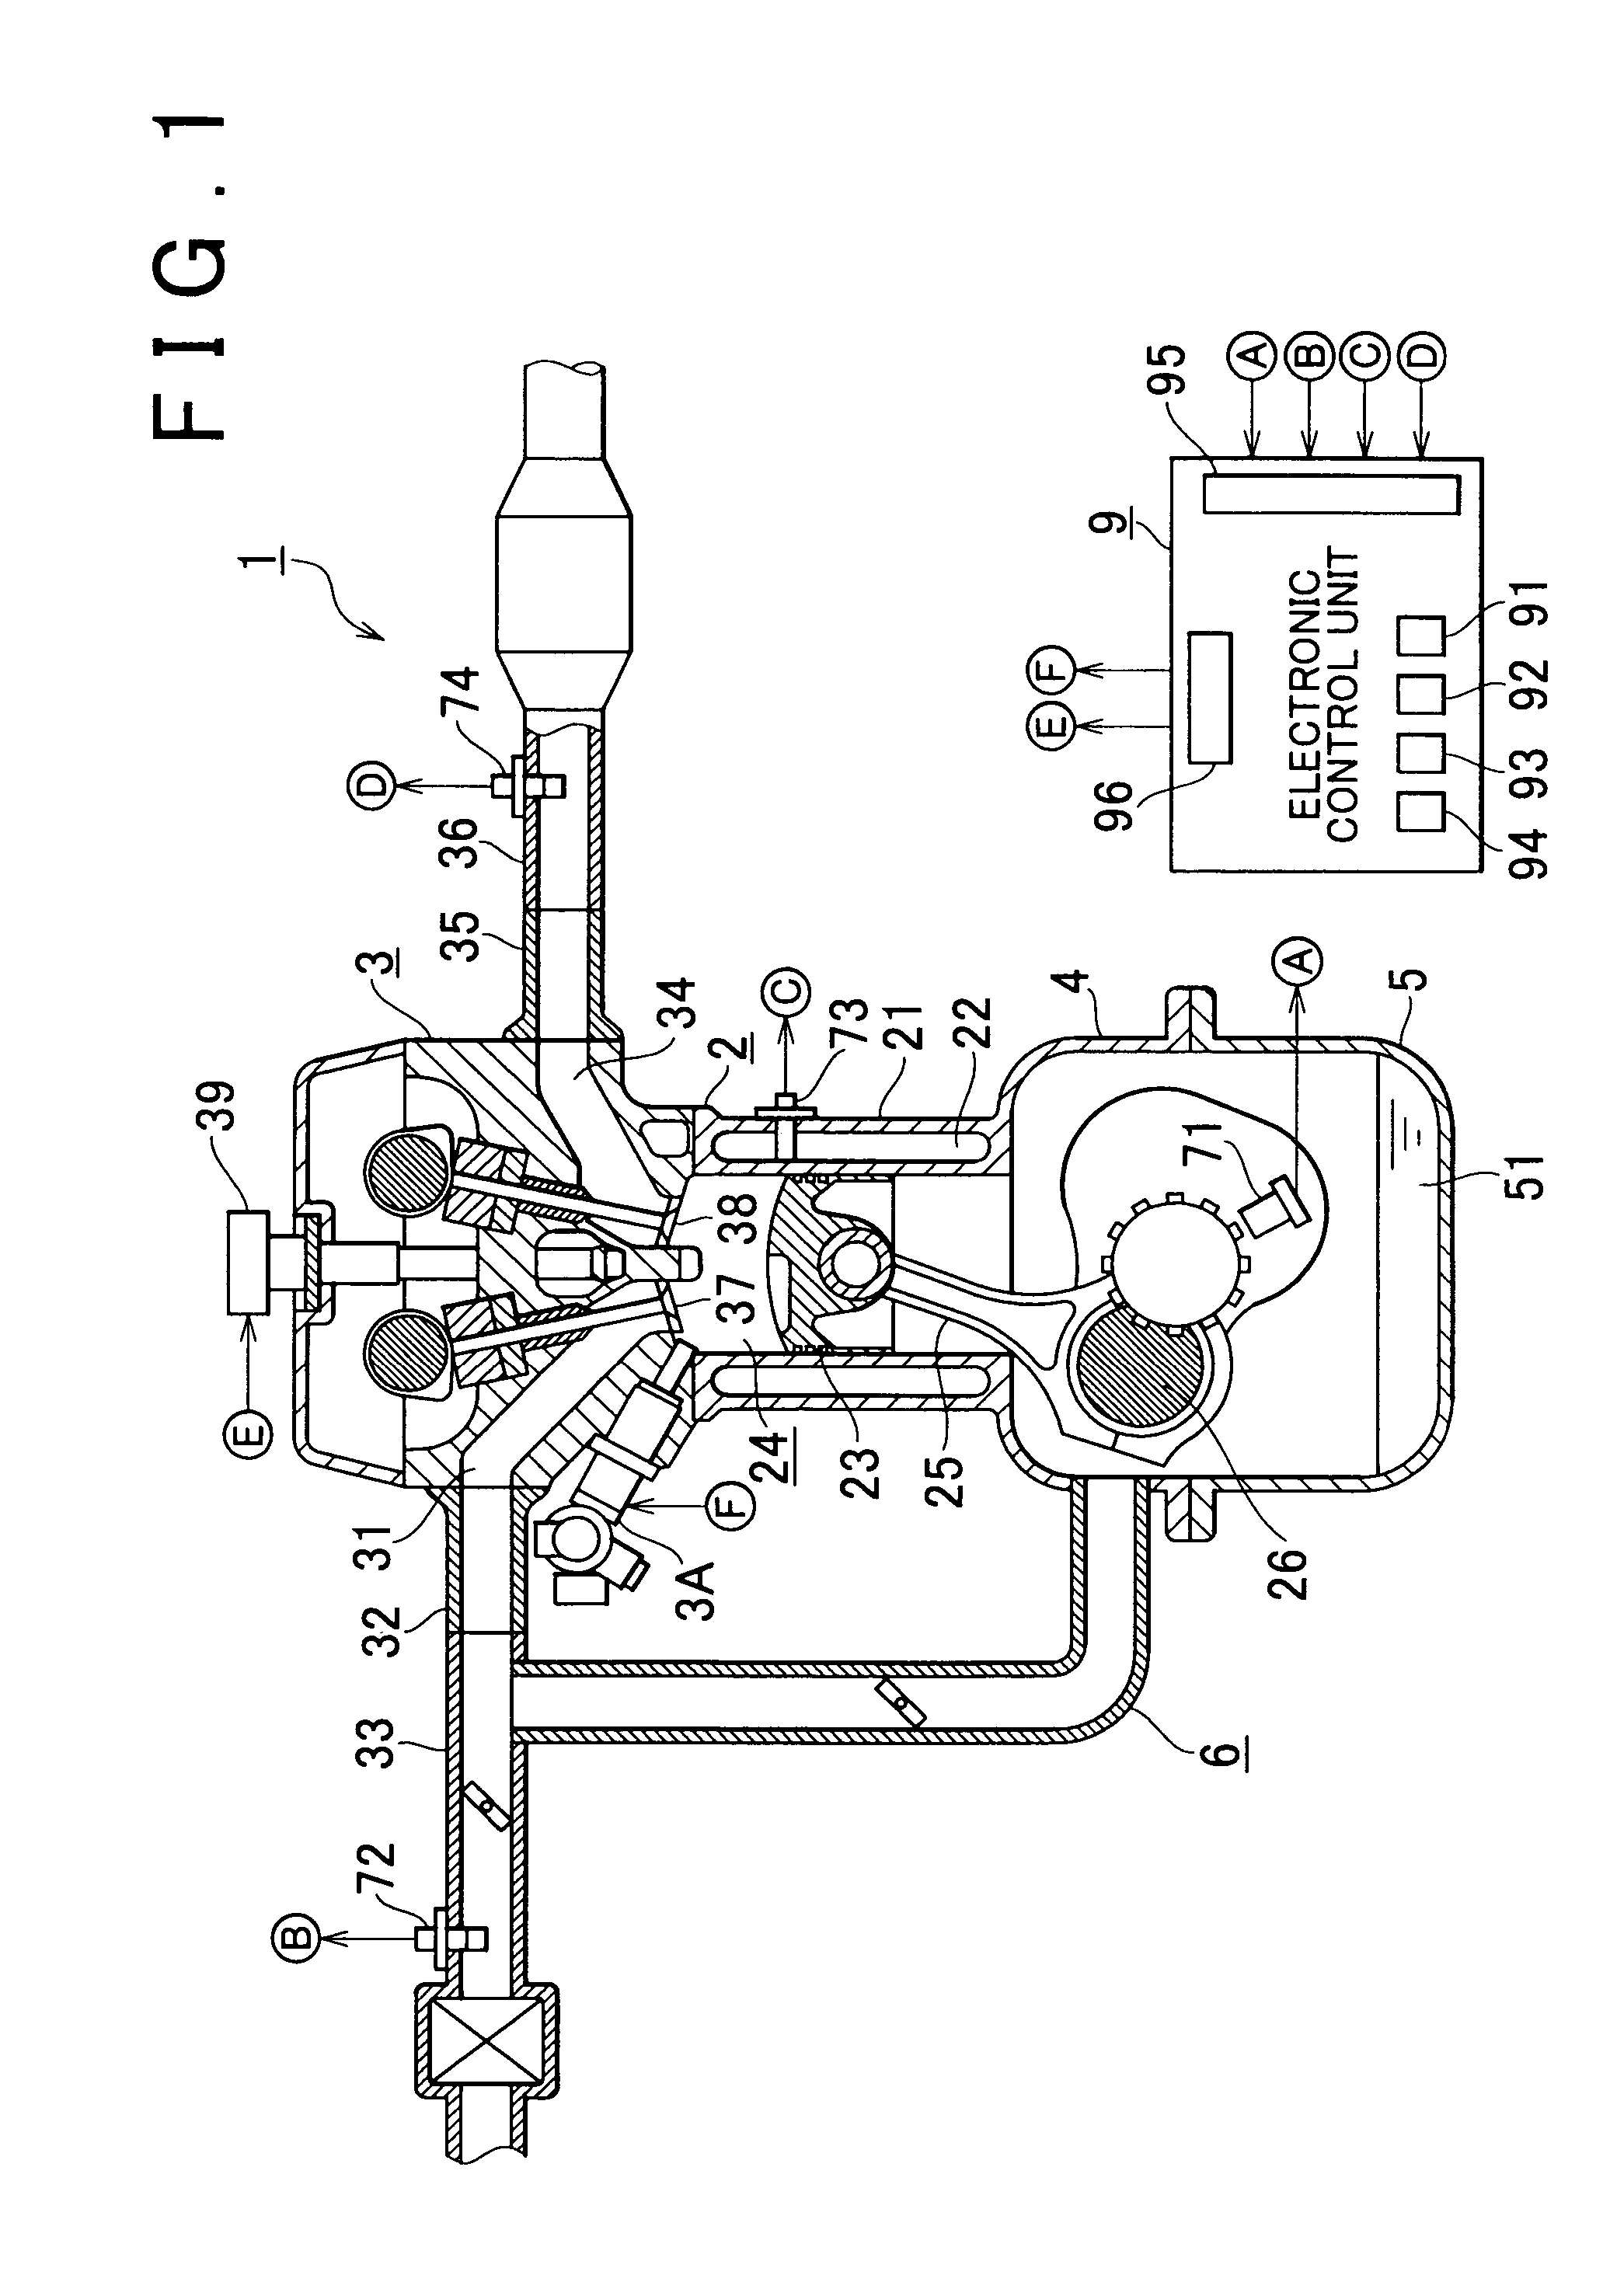 Fuel injection control apparatus for direct injection type internal combustion engine